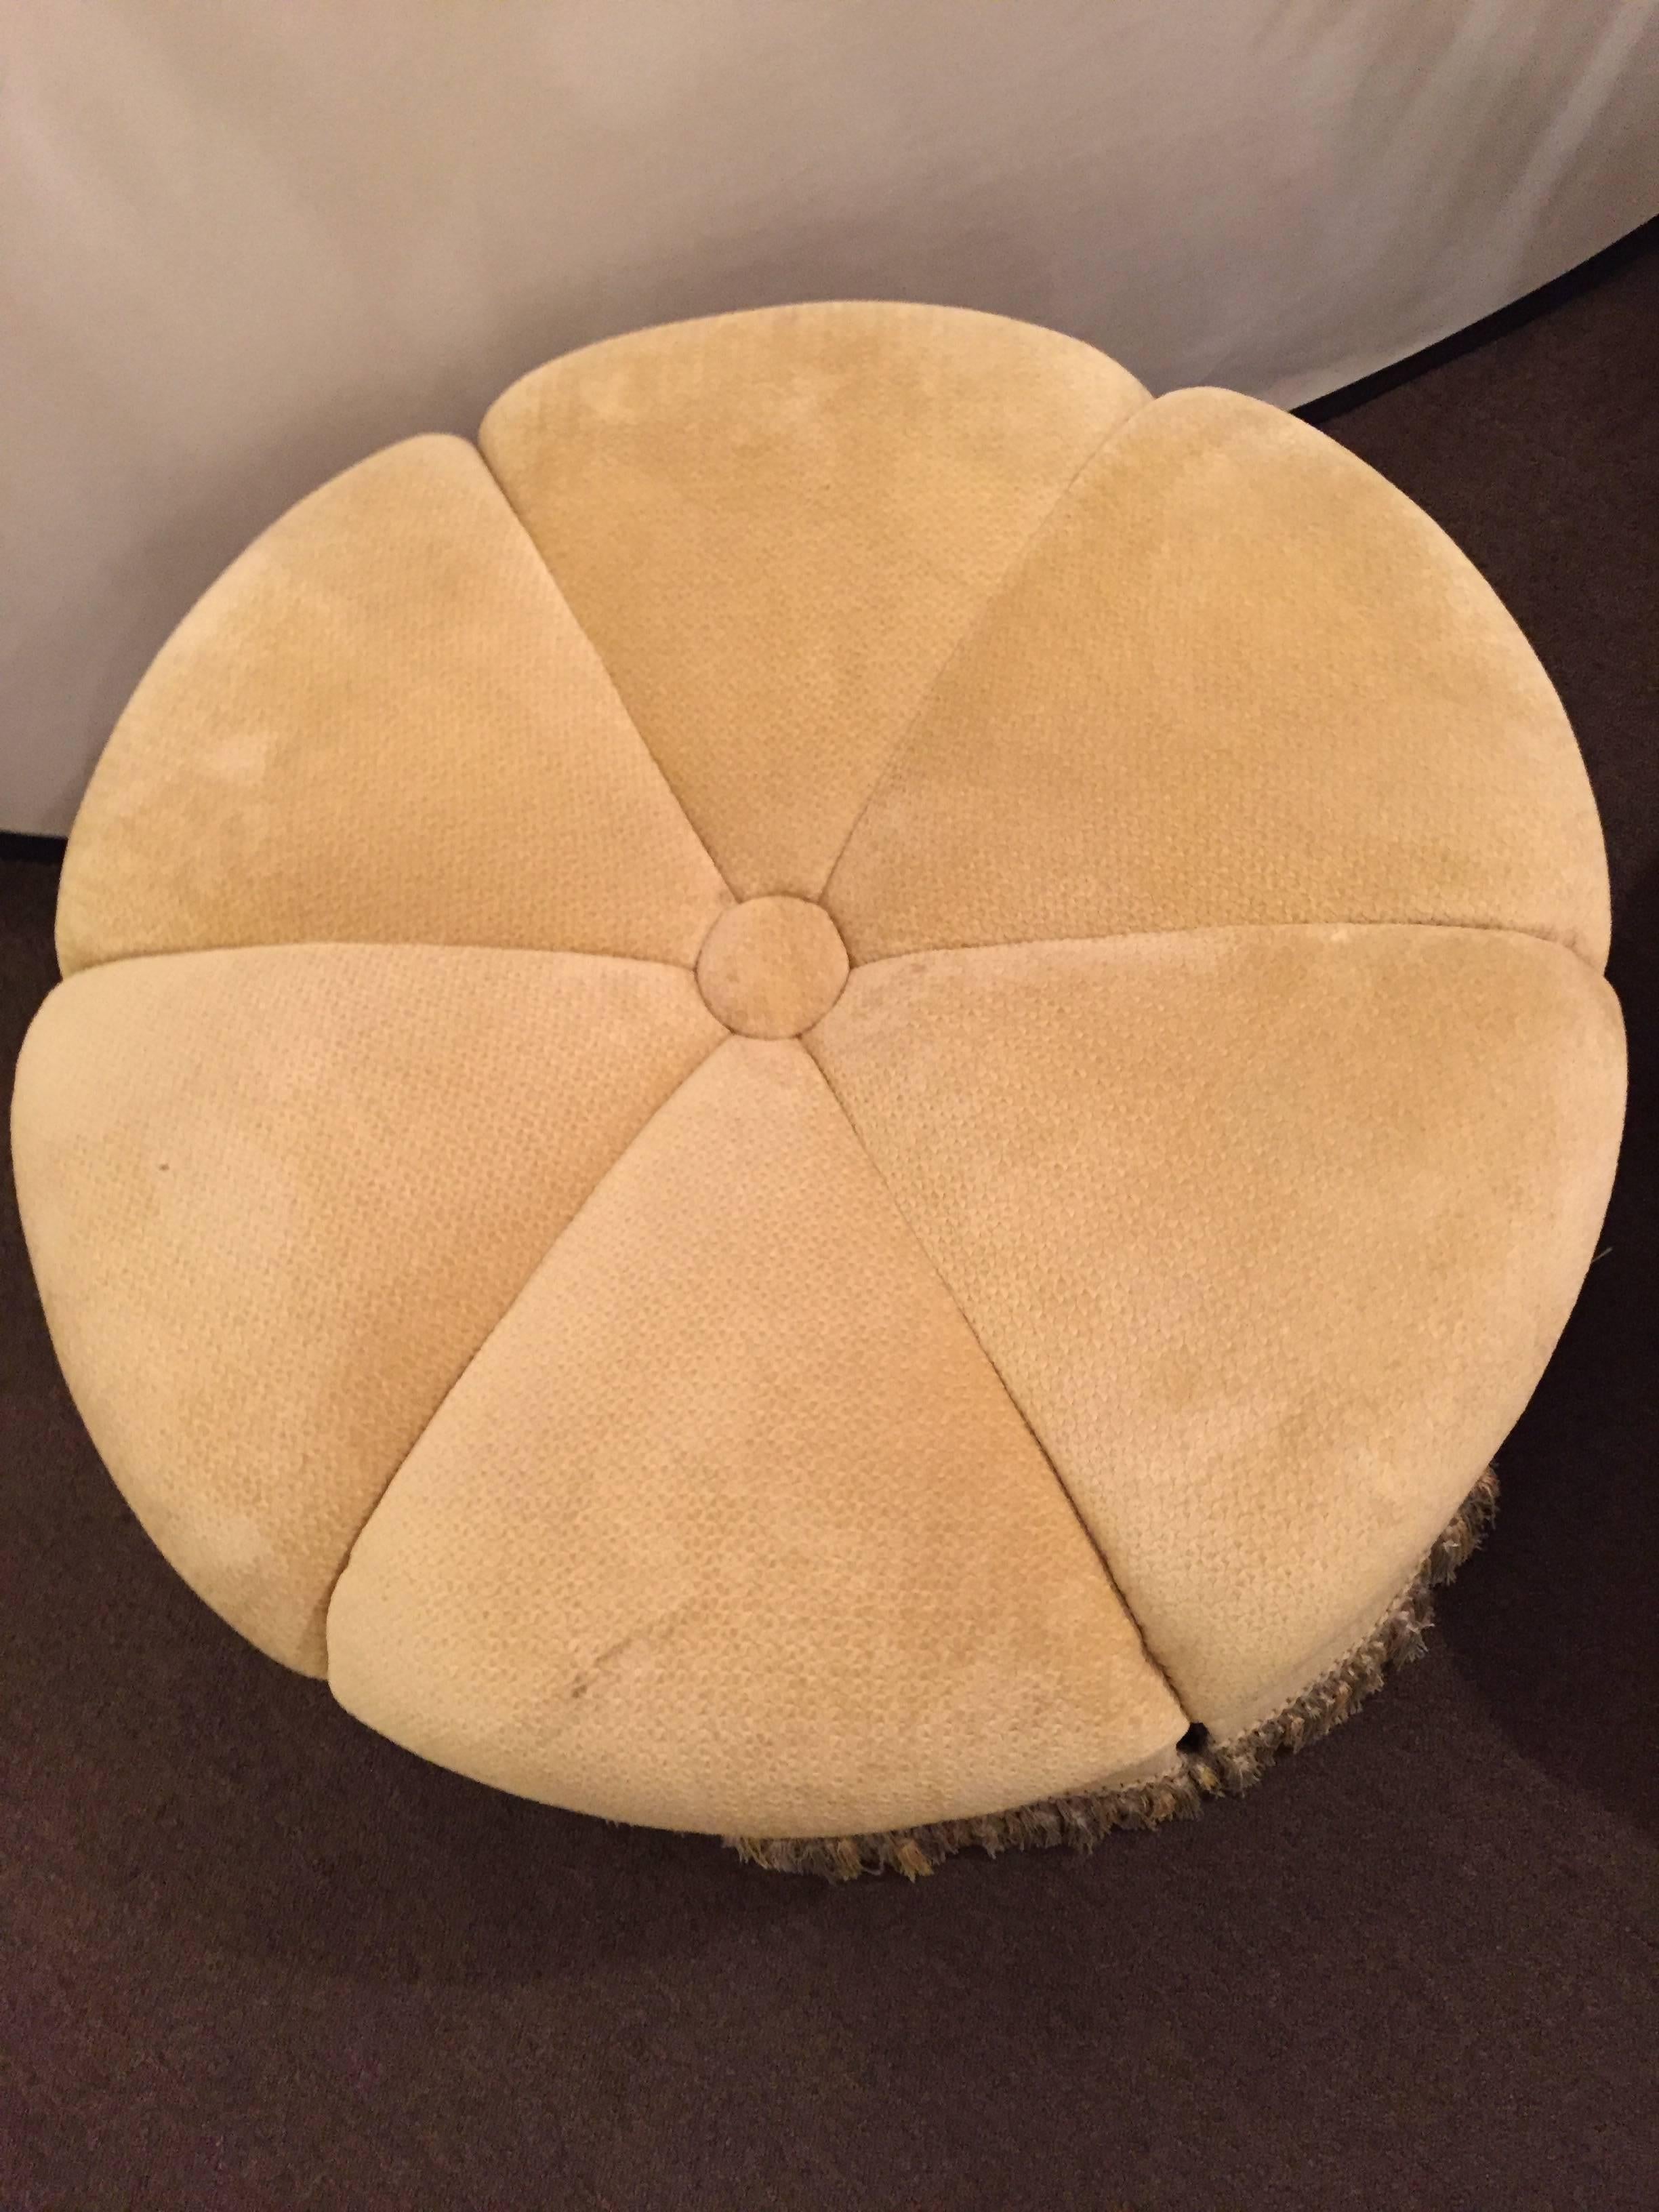 A circular finely upholstered and lined ottoman or pouf with a tassel fringe base. Done in the Hollywood Regency style this ottoman is finely detailed and very decorative.